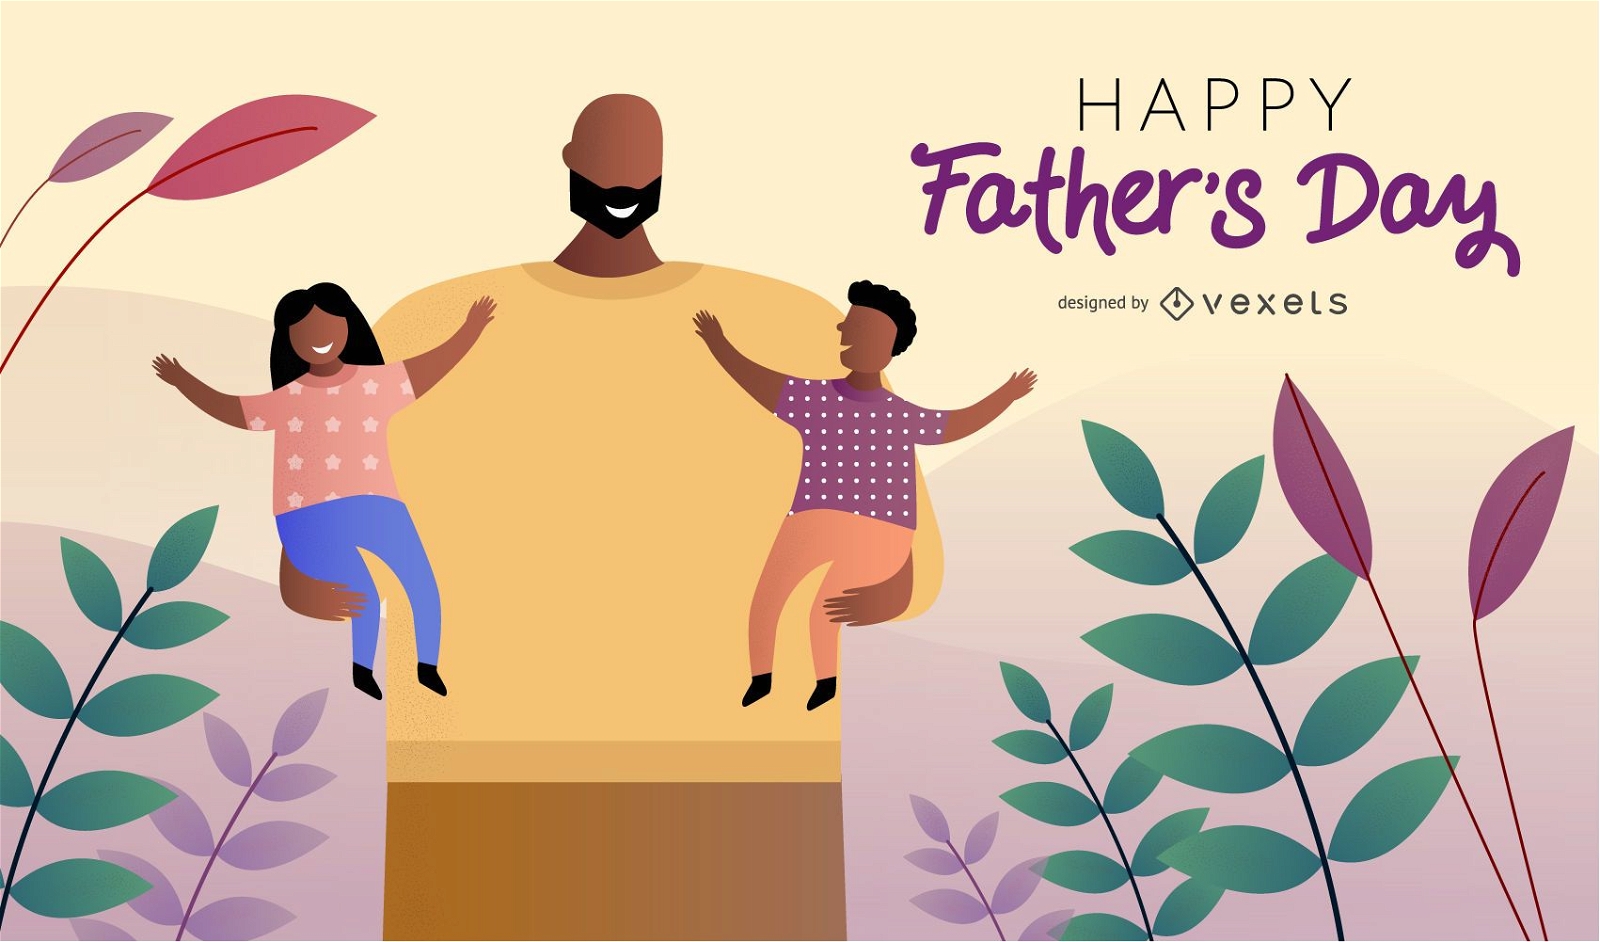 Happy Father's Day Illustration Design Vector Download